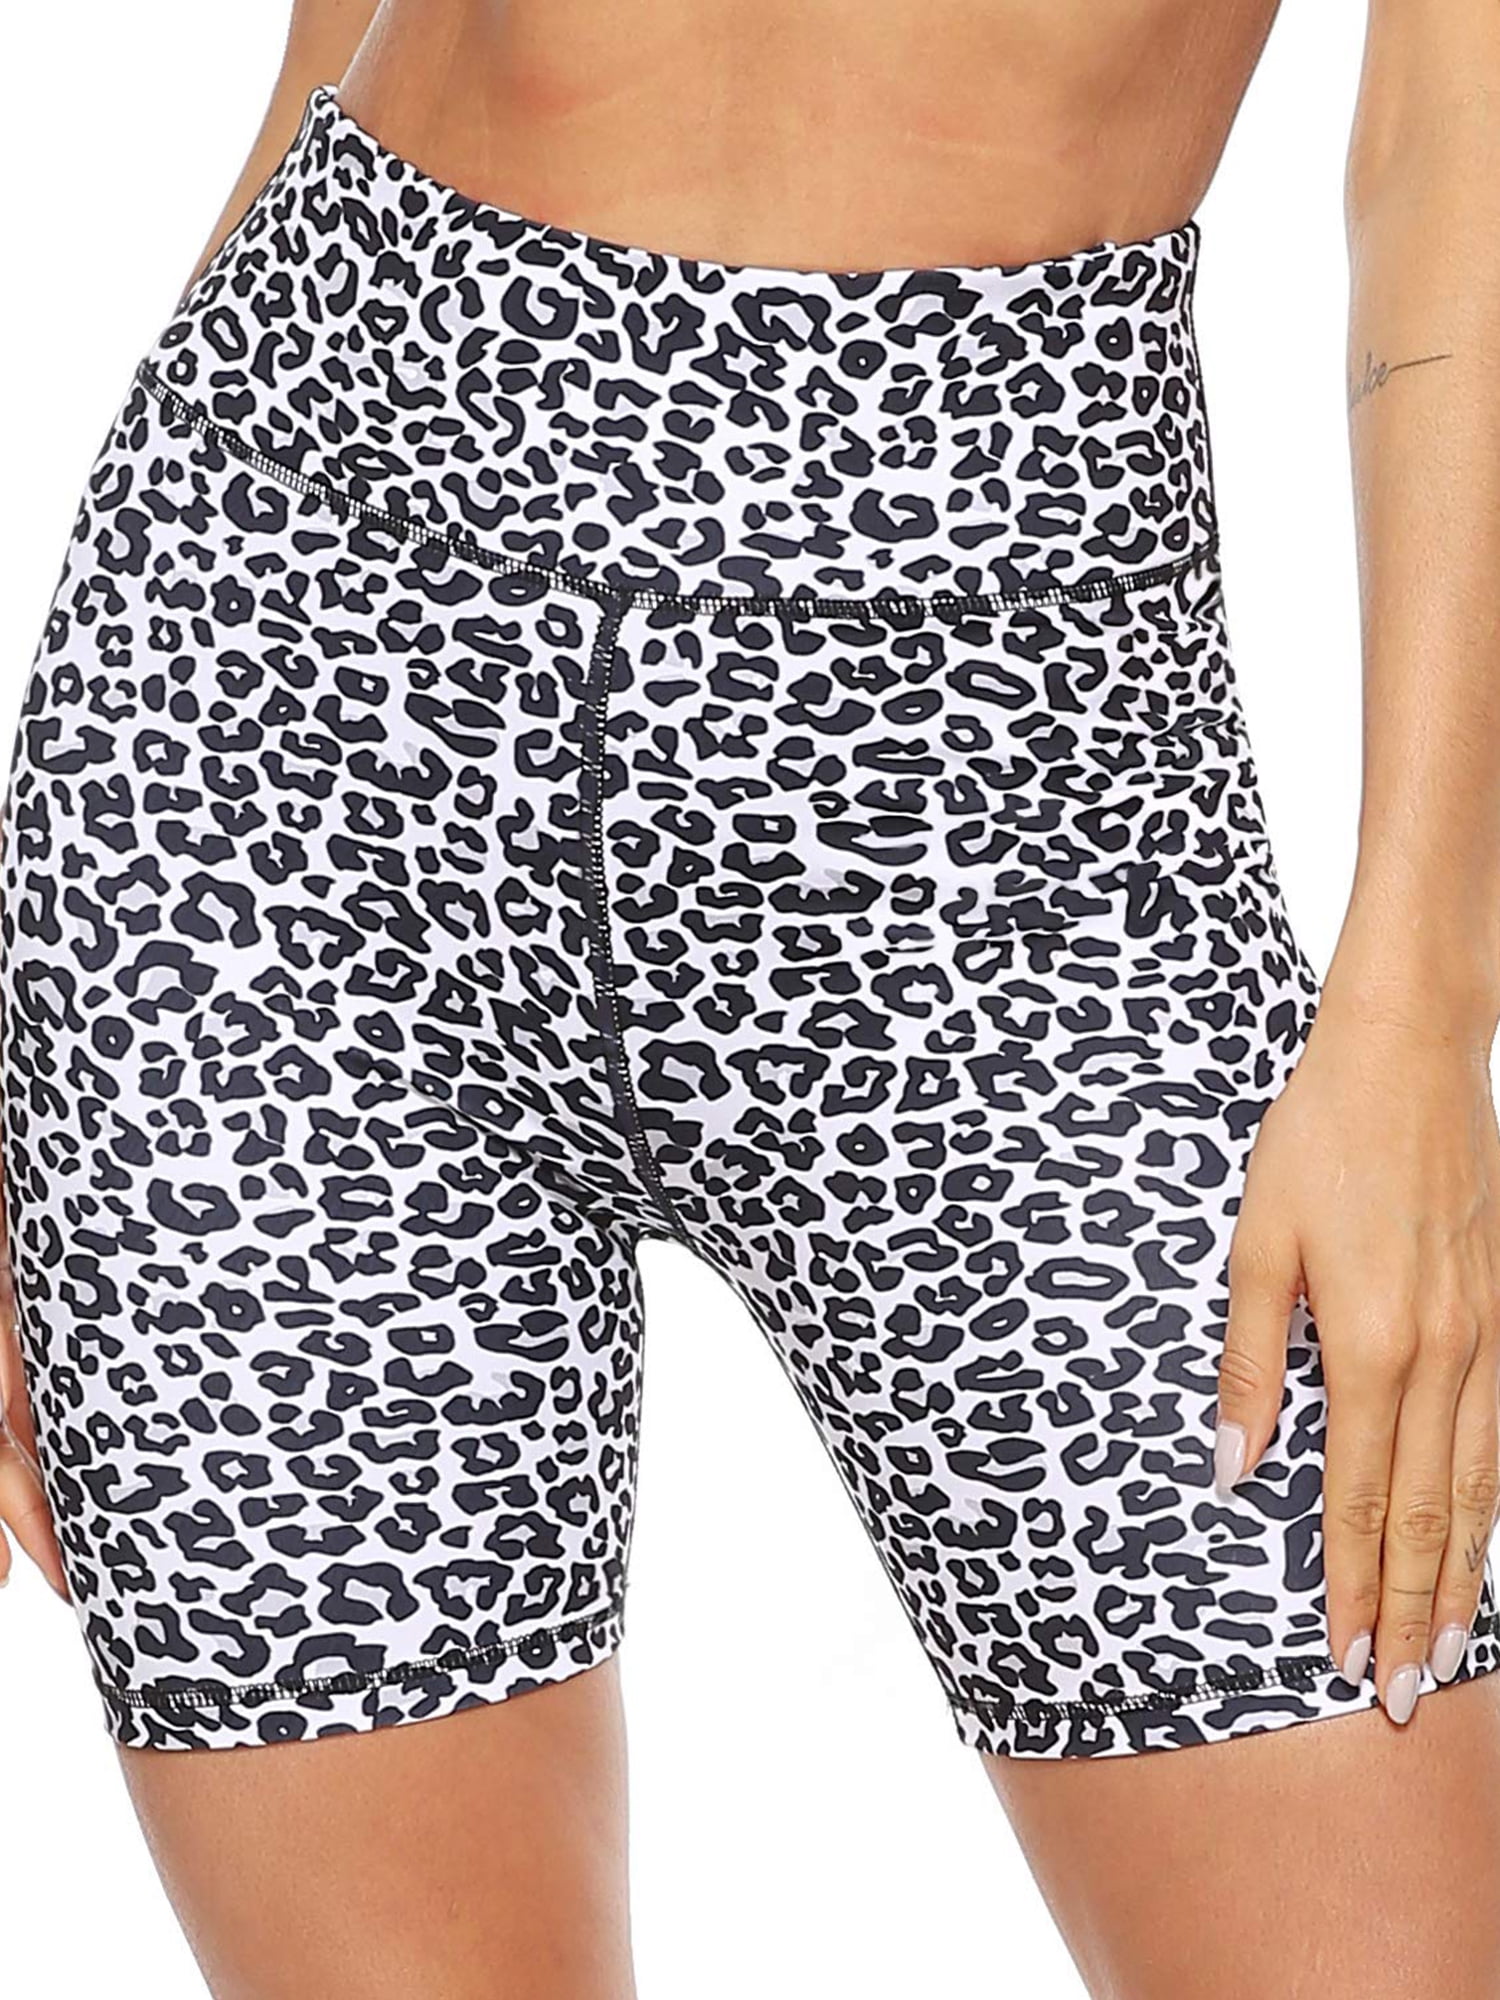 New Womens Leopard Camo Printed Stretchy Dance Active Gym Sports Cycling Shorts 